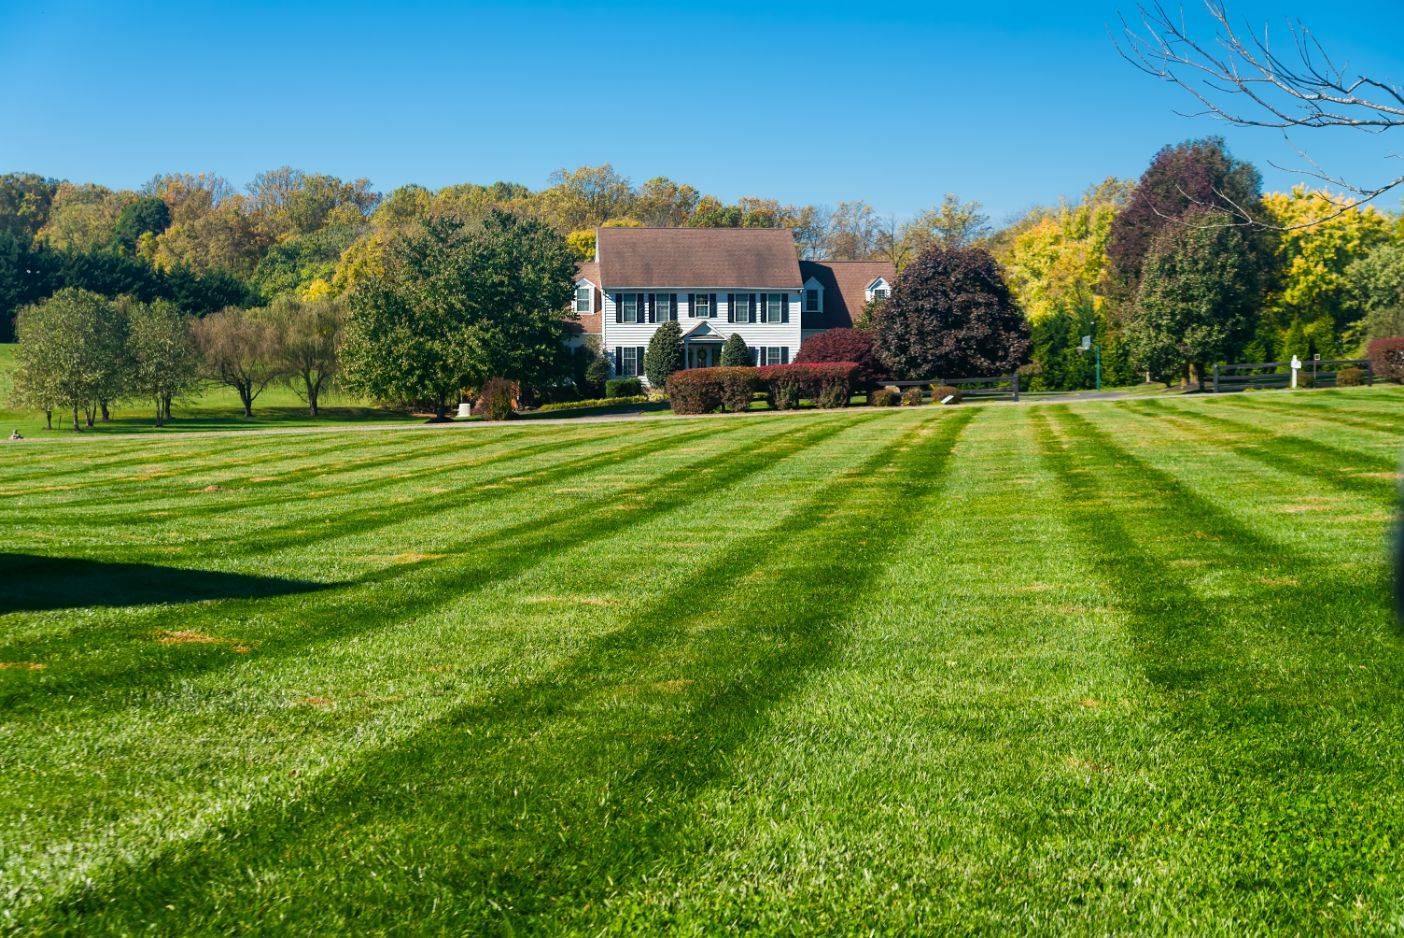 Best lawn care service in Pittsburgh